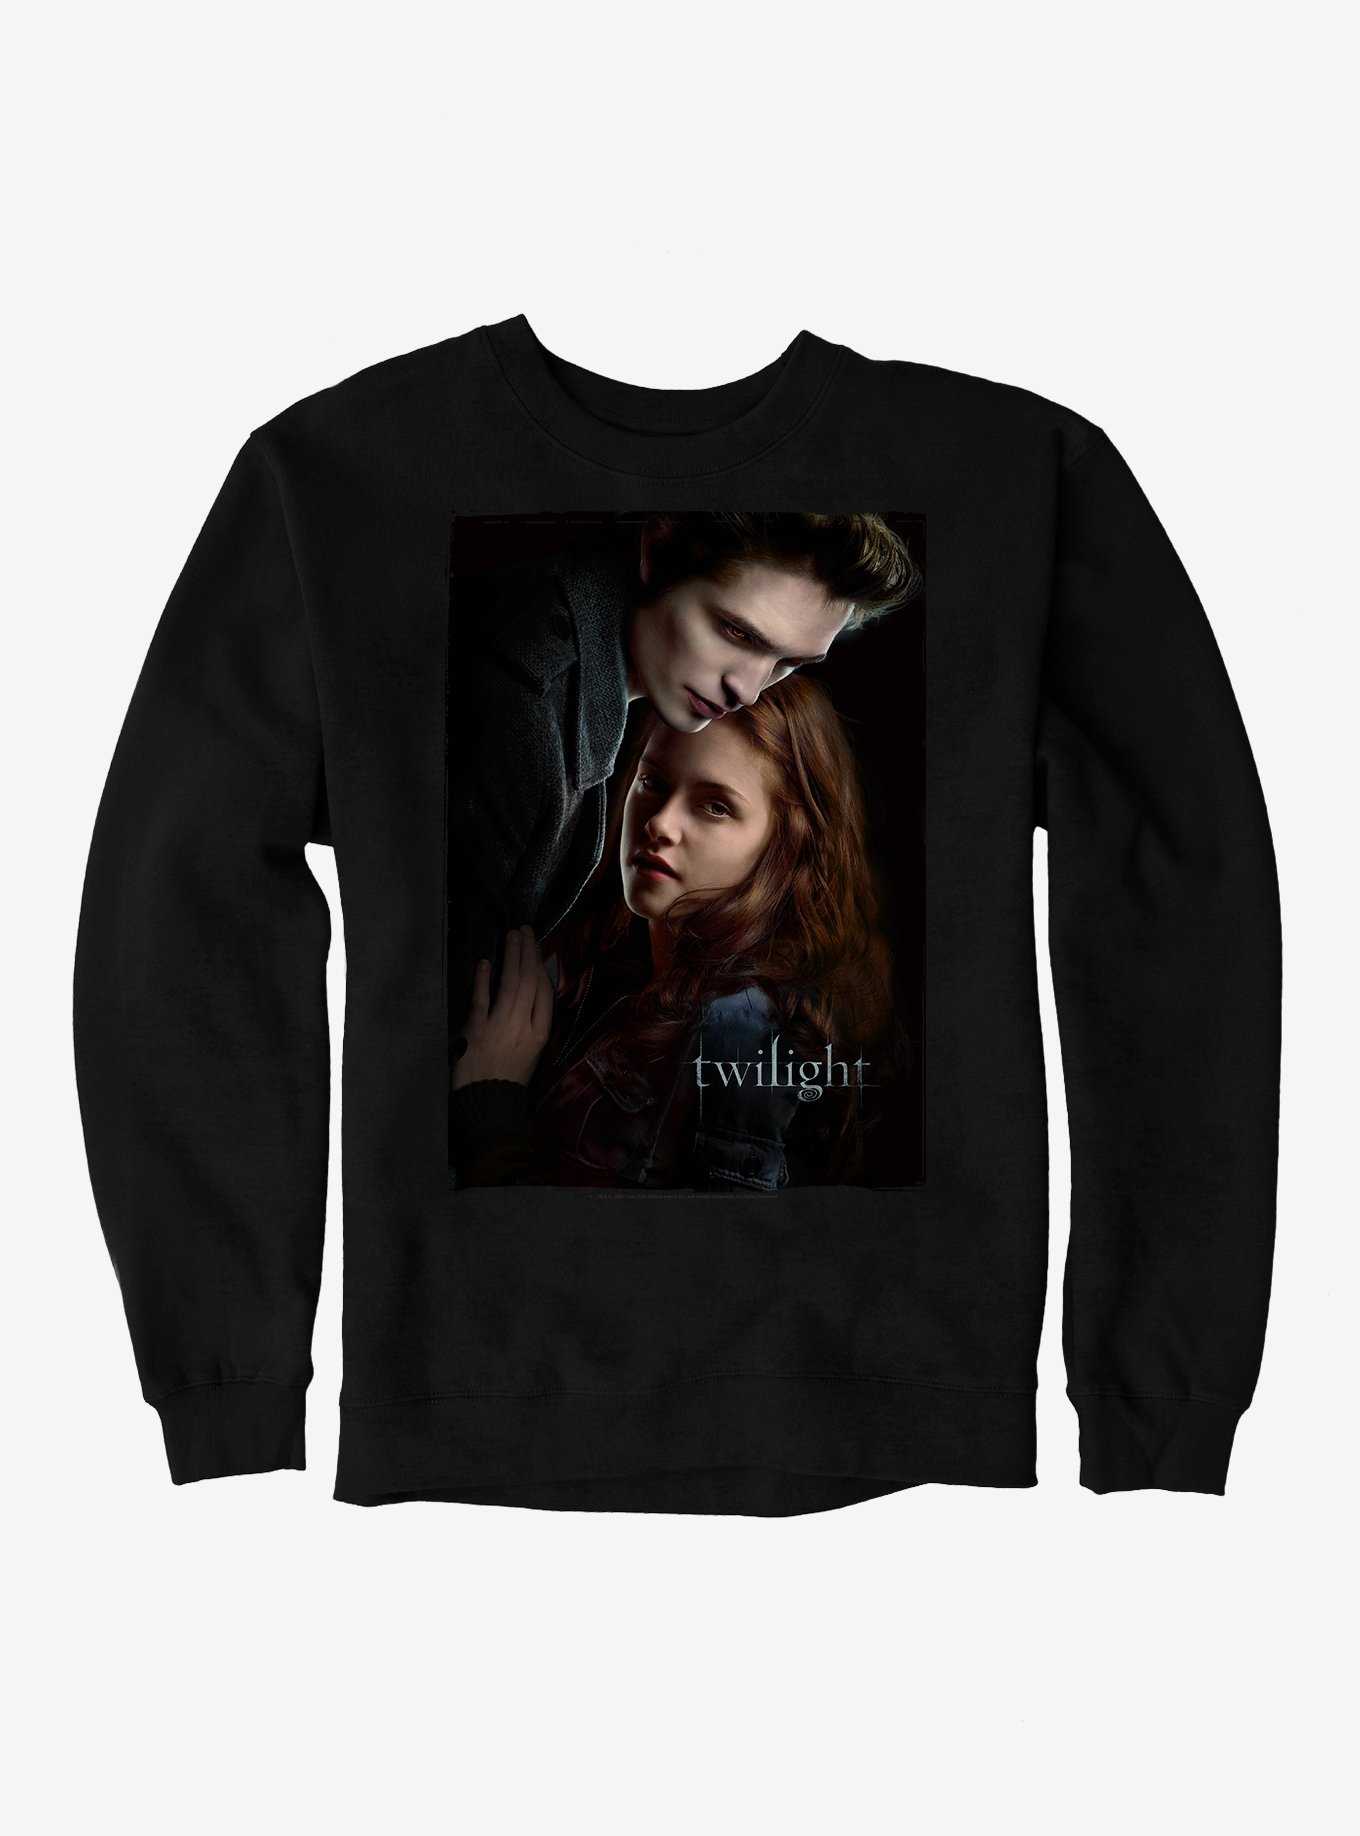 Twilight Edward Cullen Girly Shirt Hot Topic 2008 'You Are My Life Now'  Black